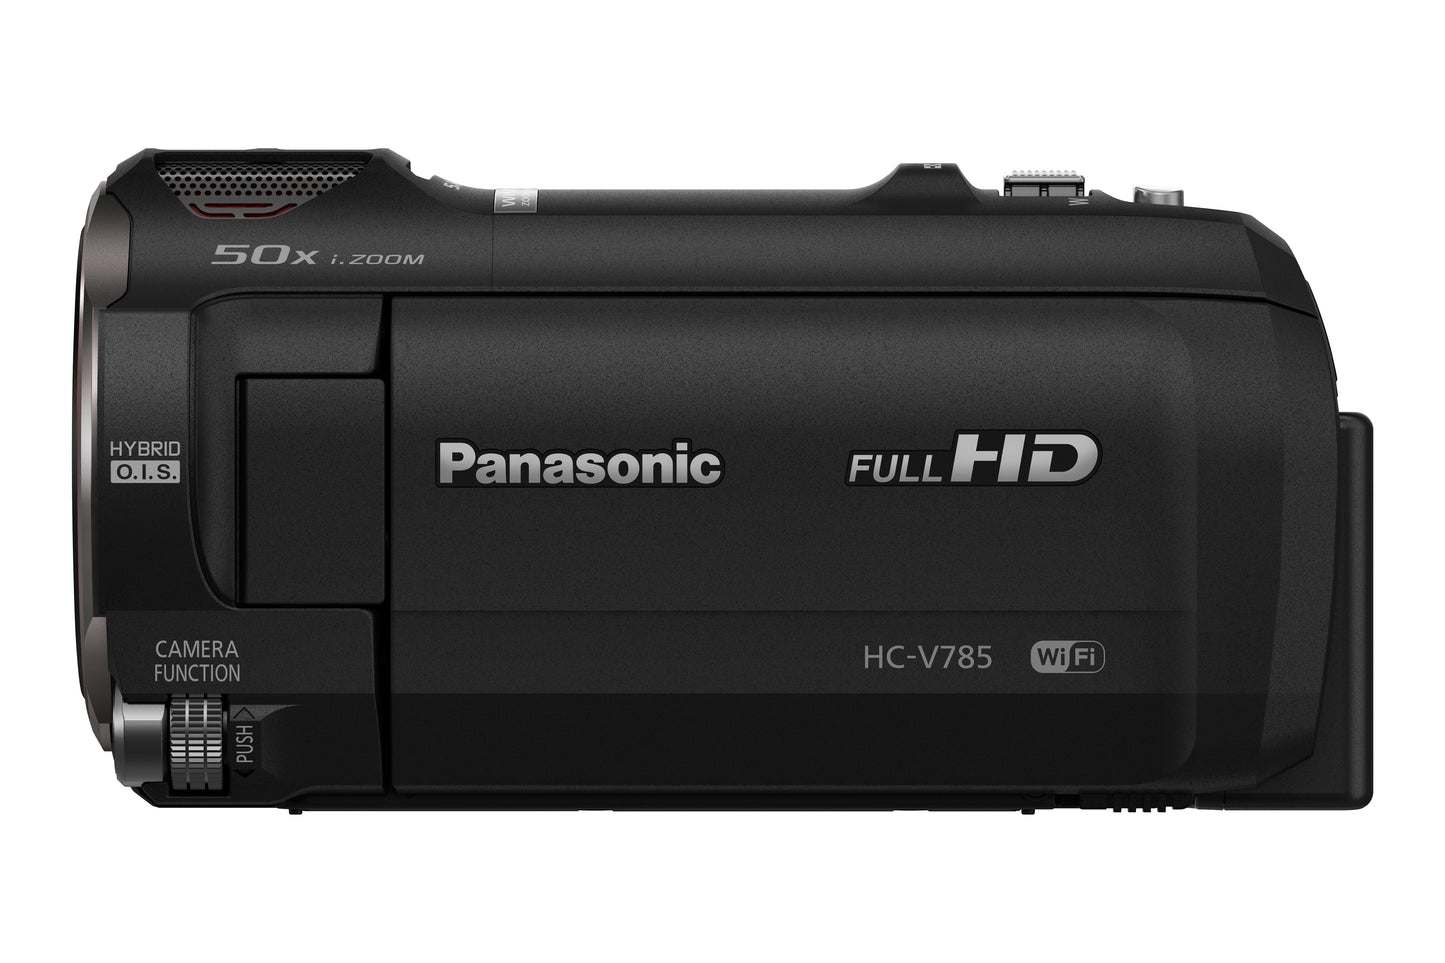 Panasonic HC-V785 Full HD Camcorder with 20x Optical Zoom, 3" LCD, WiFi & SD/SDHC/SDXC Compatibility - Black